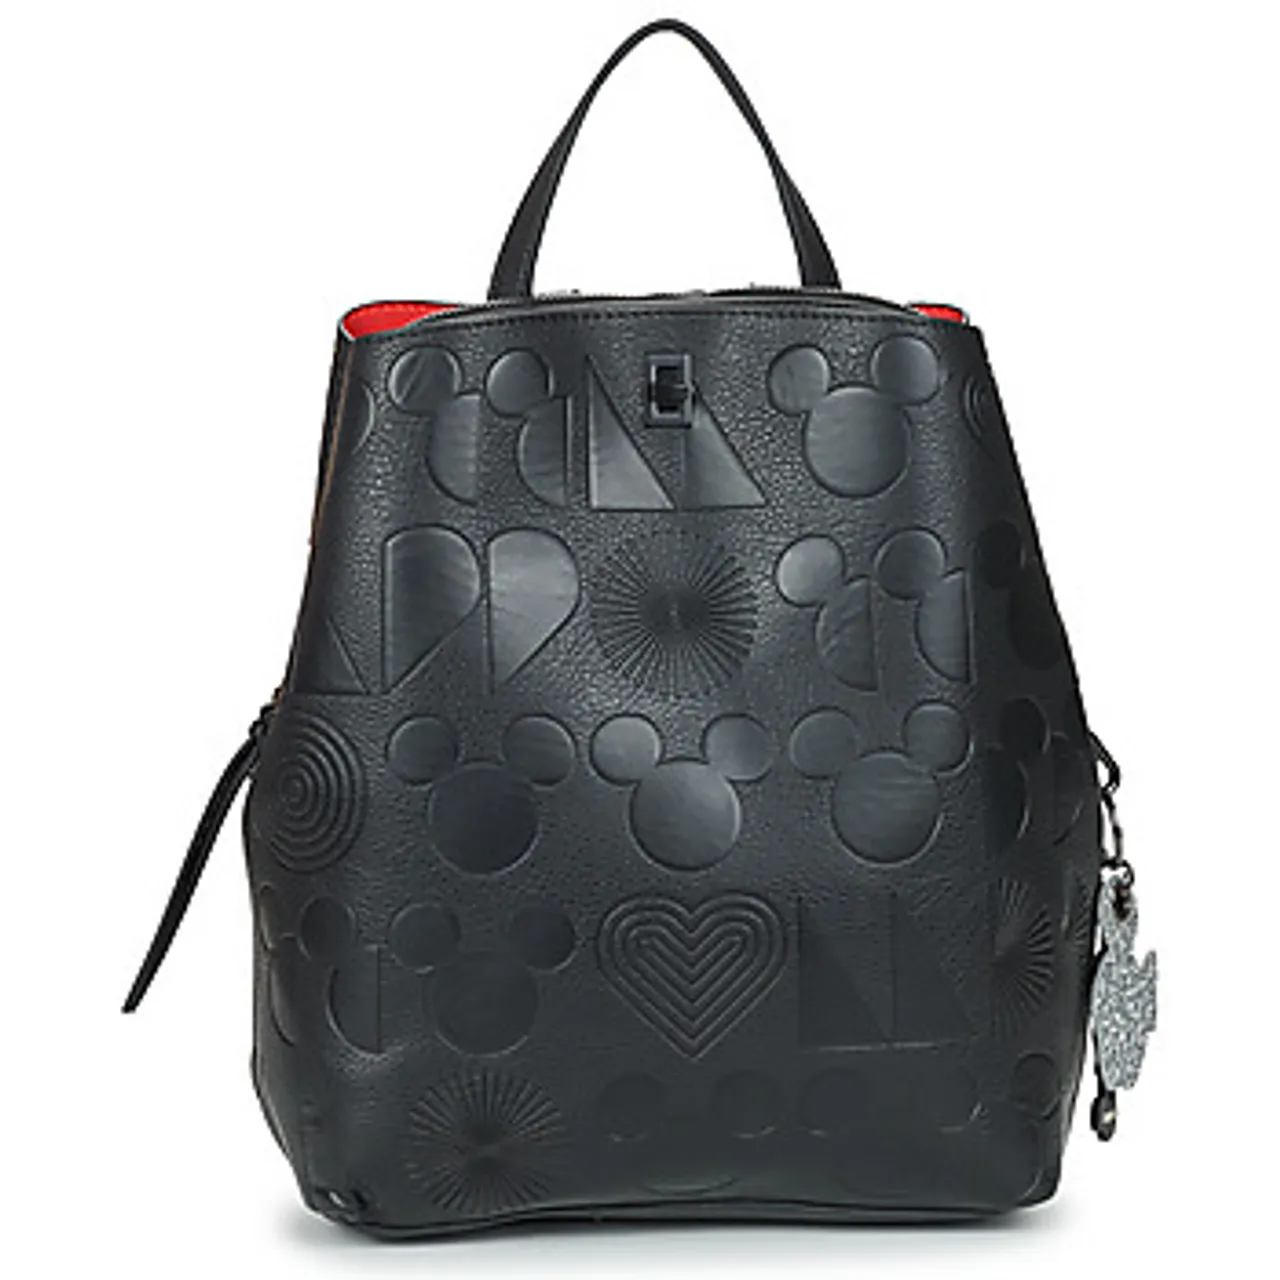 Desigual  ALL MICKEY SUMY  women's Backpack in Black